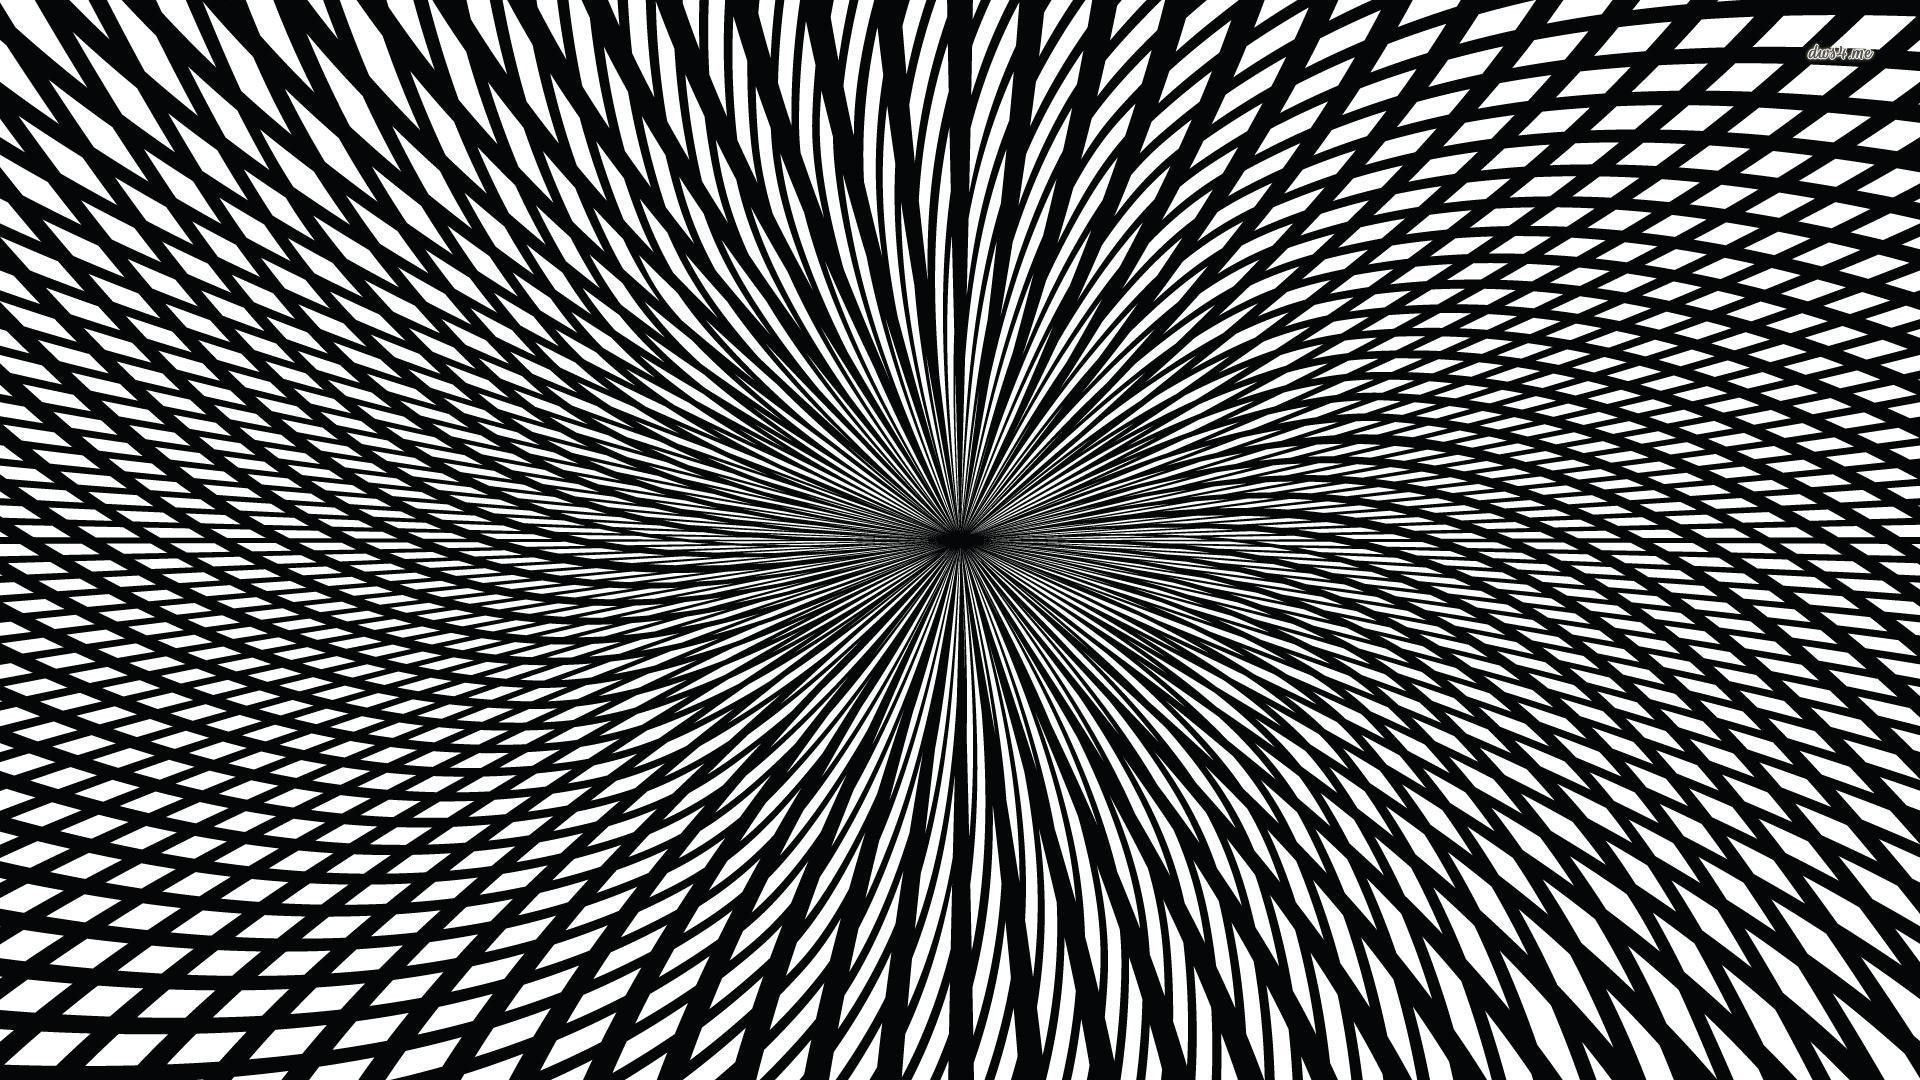 Optical illusion wallpaper – Abstract wallpapers –